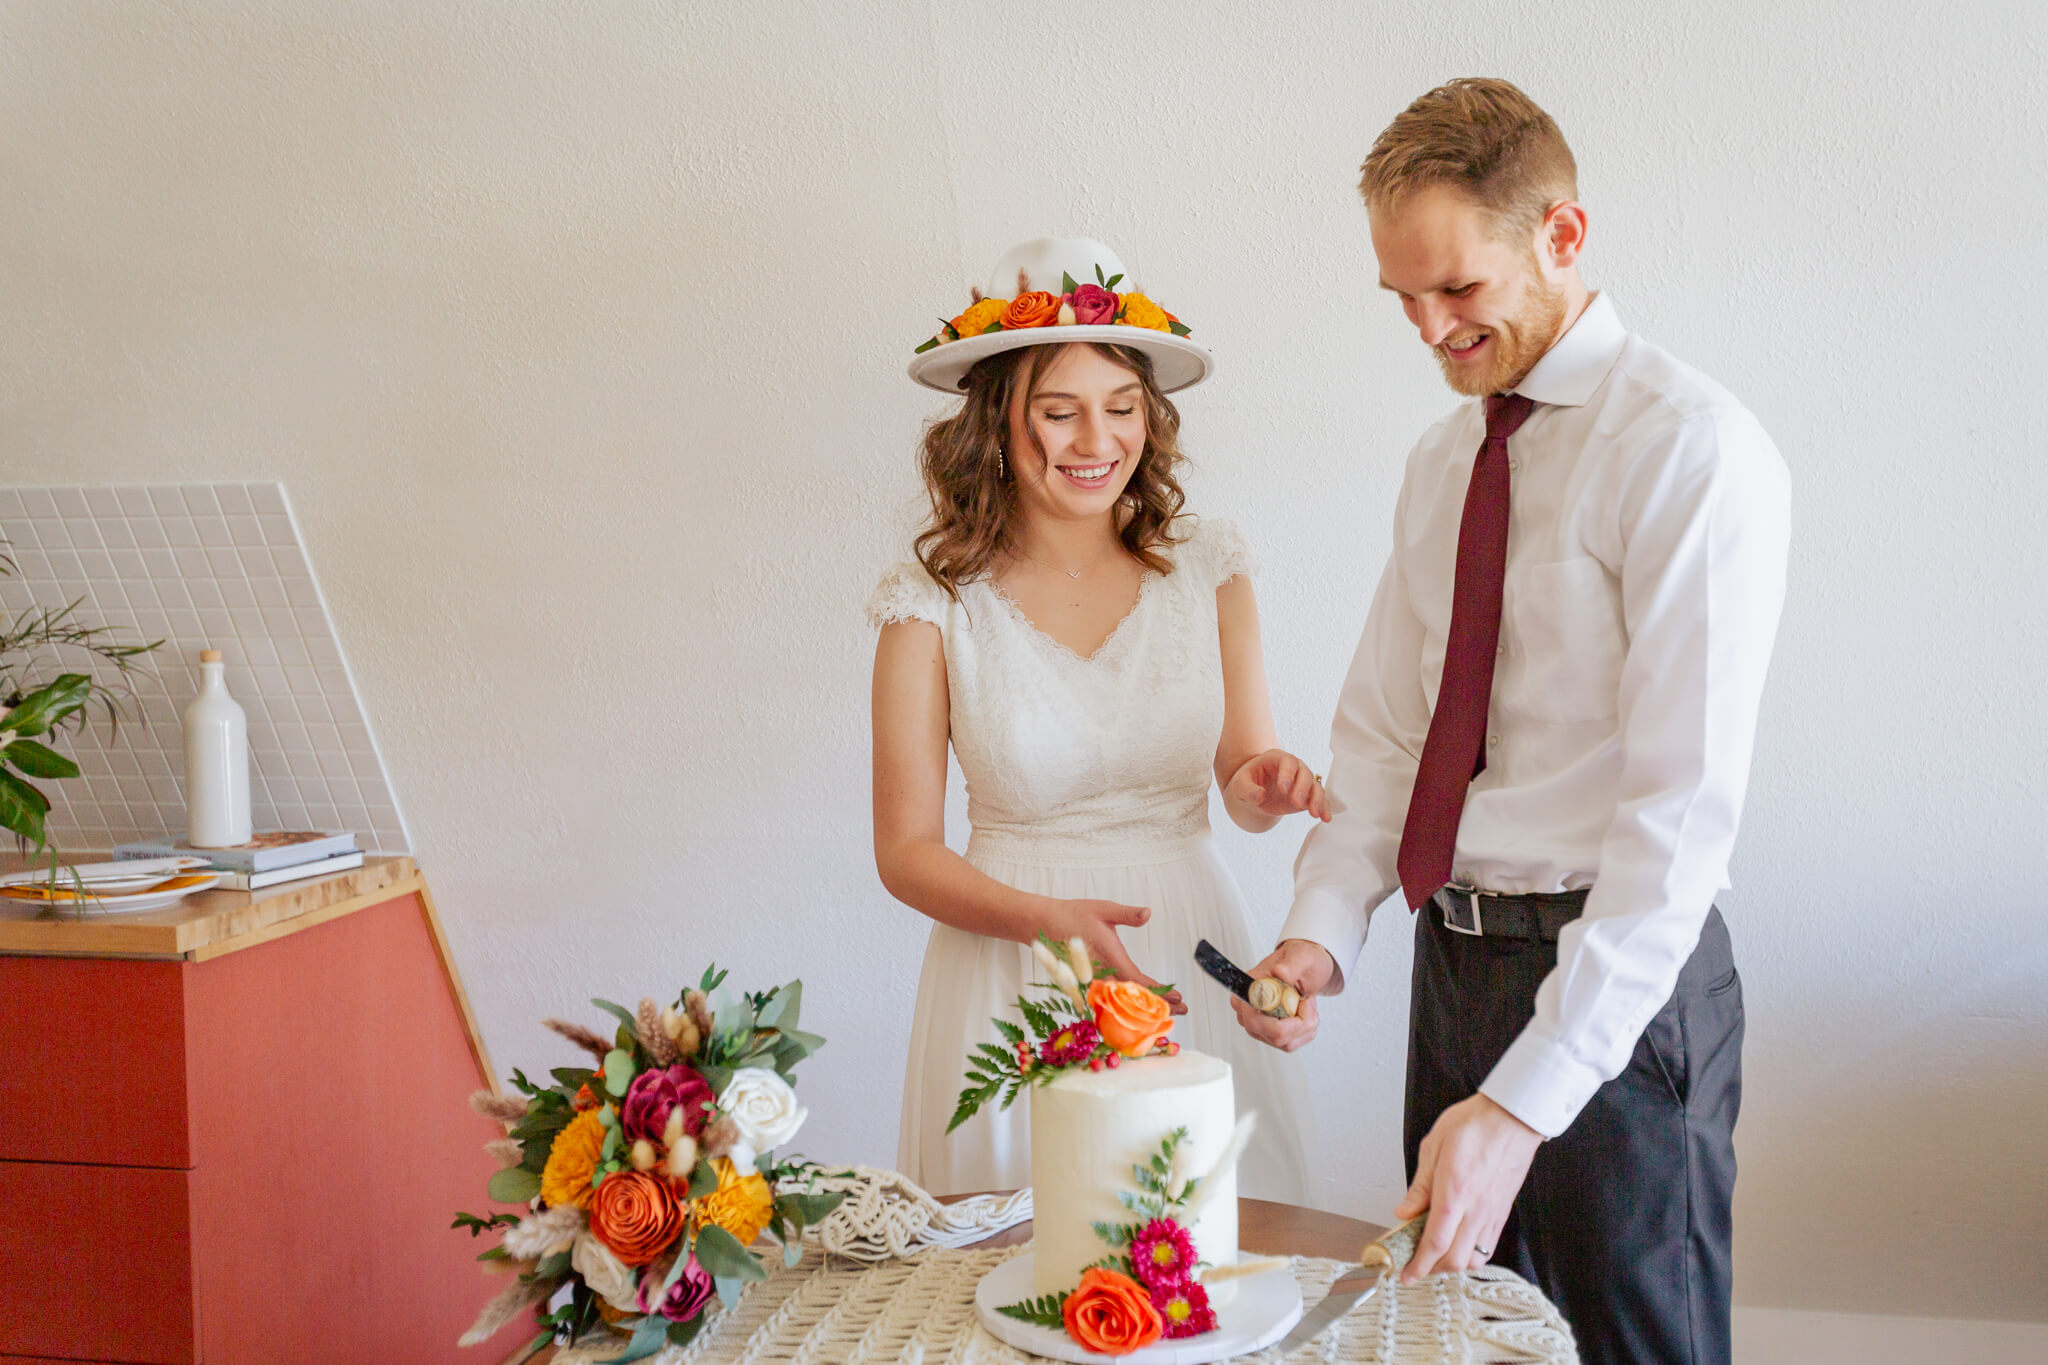 Couple about to cut a slice of wedding cake.